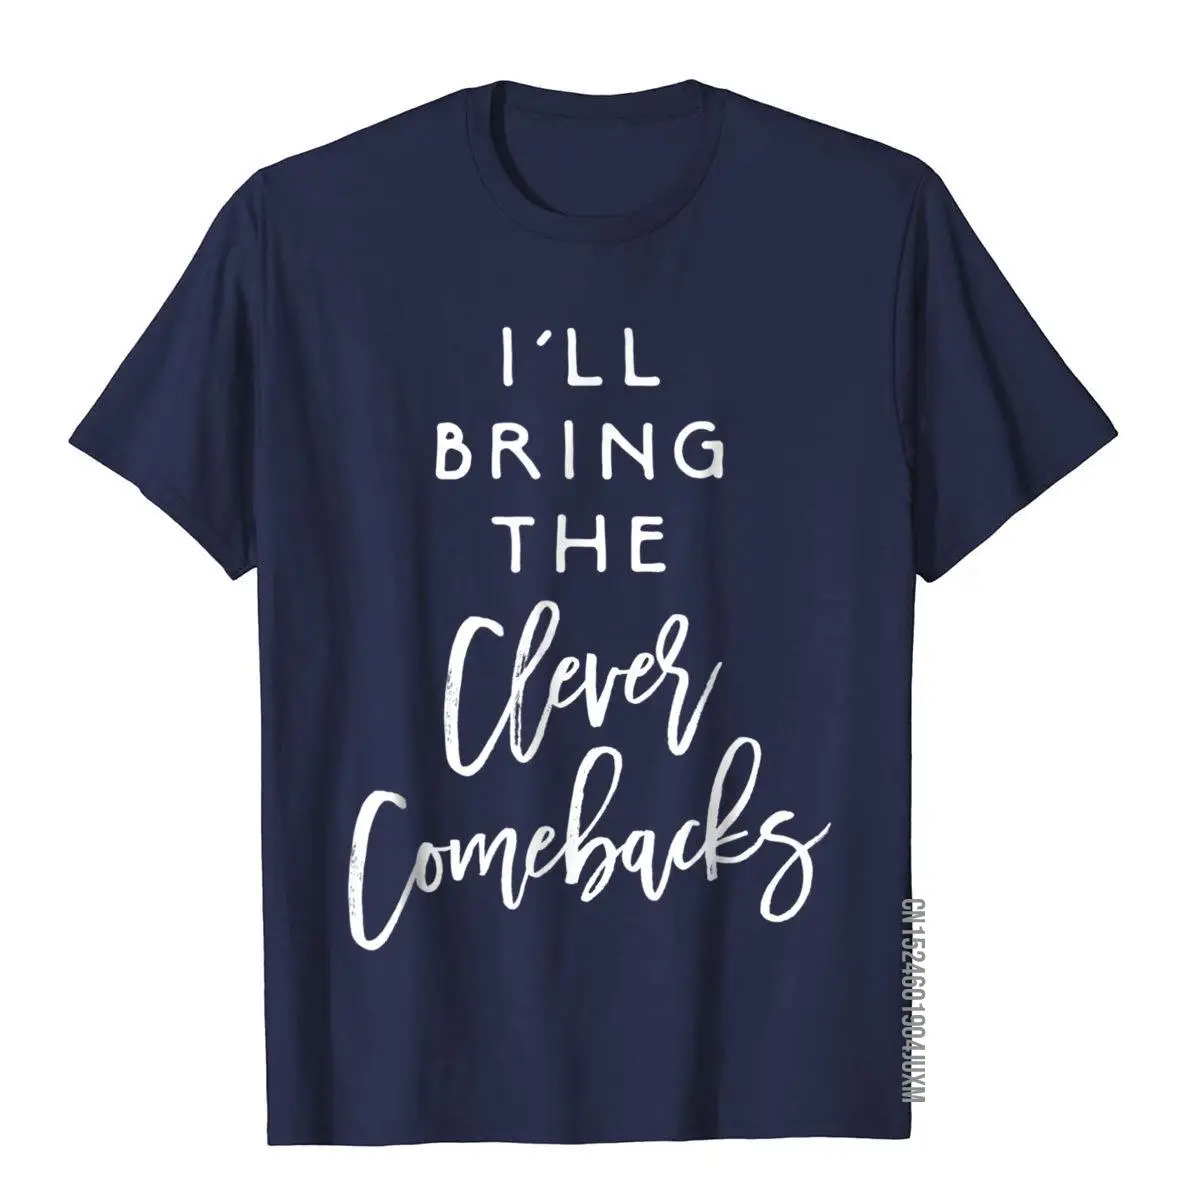 I'll Bring The Clever Comebacks Shirt Funny Party Group Tees__97A744navy